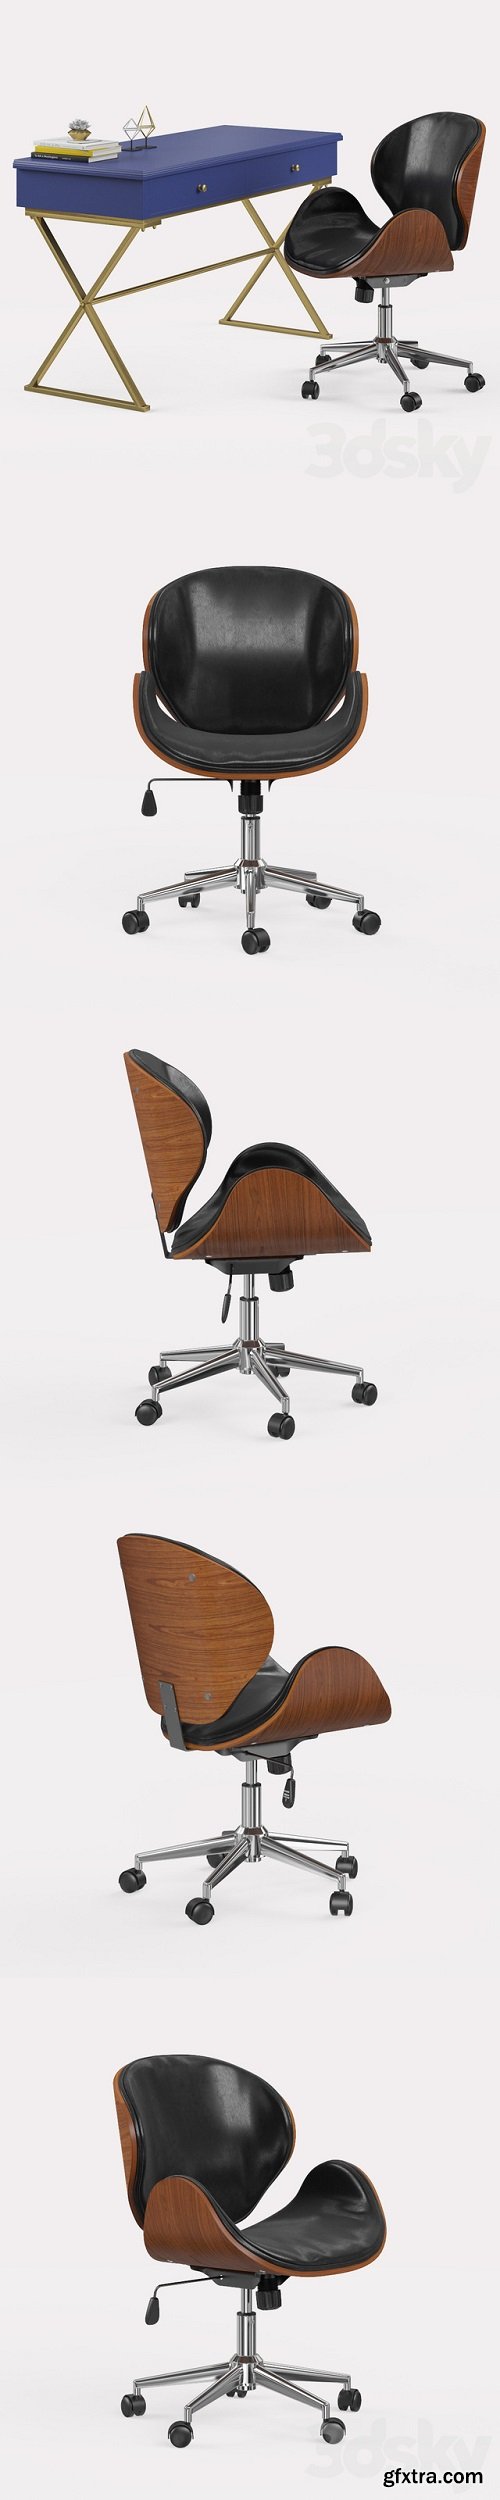 Baxton Studio Bruce modern office chair with Linon Campaign desk